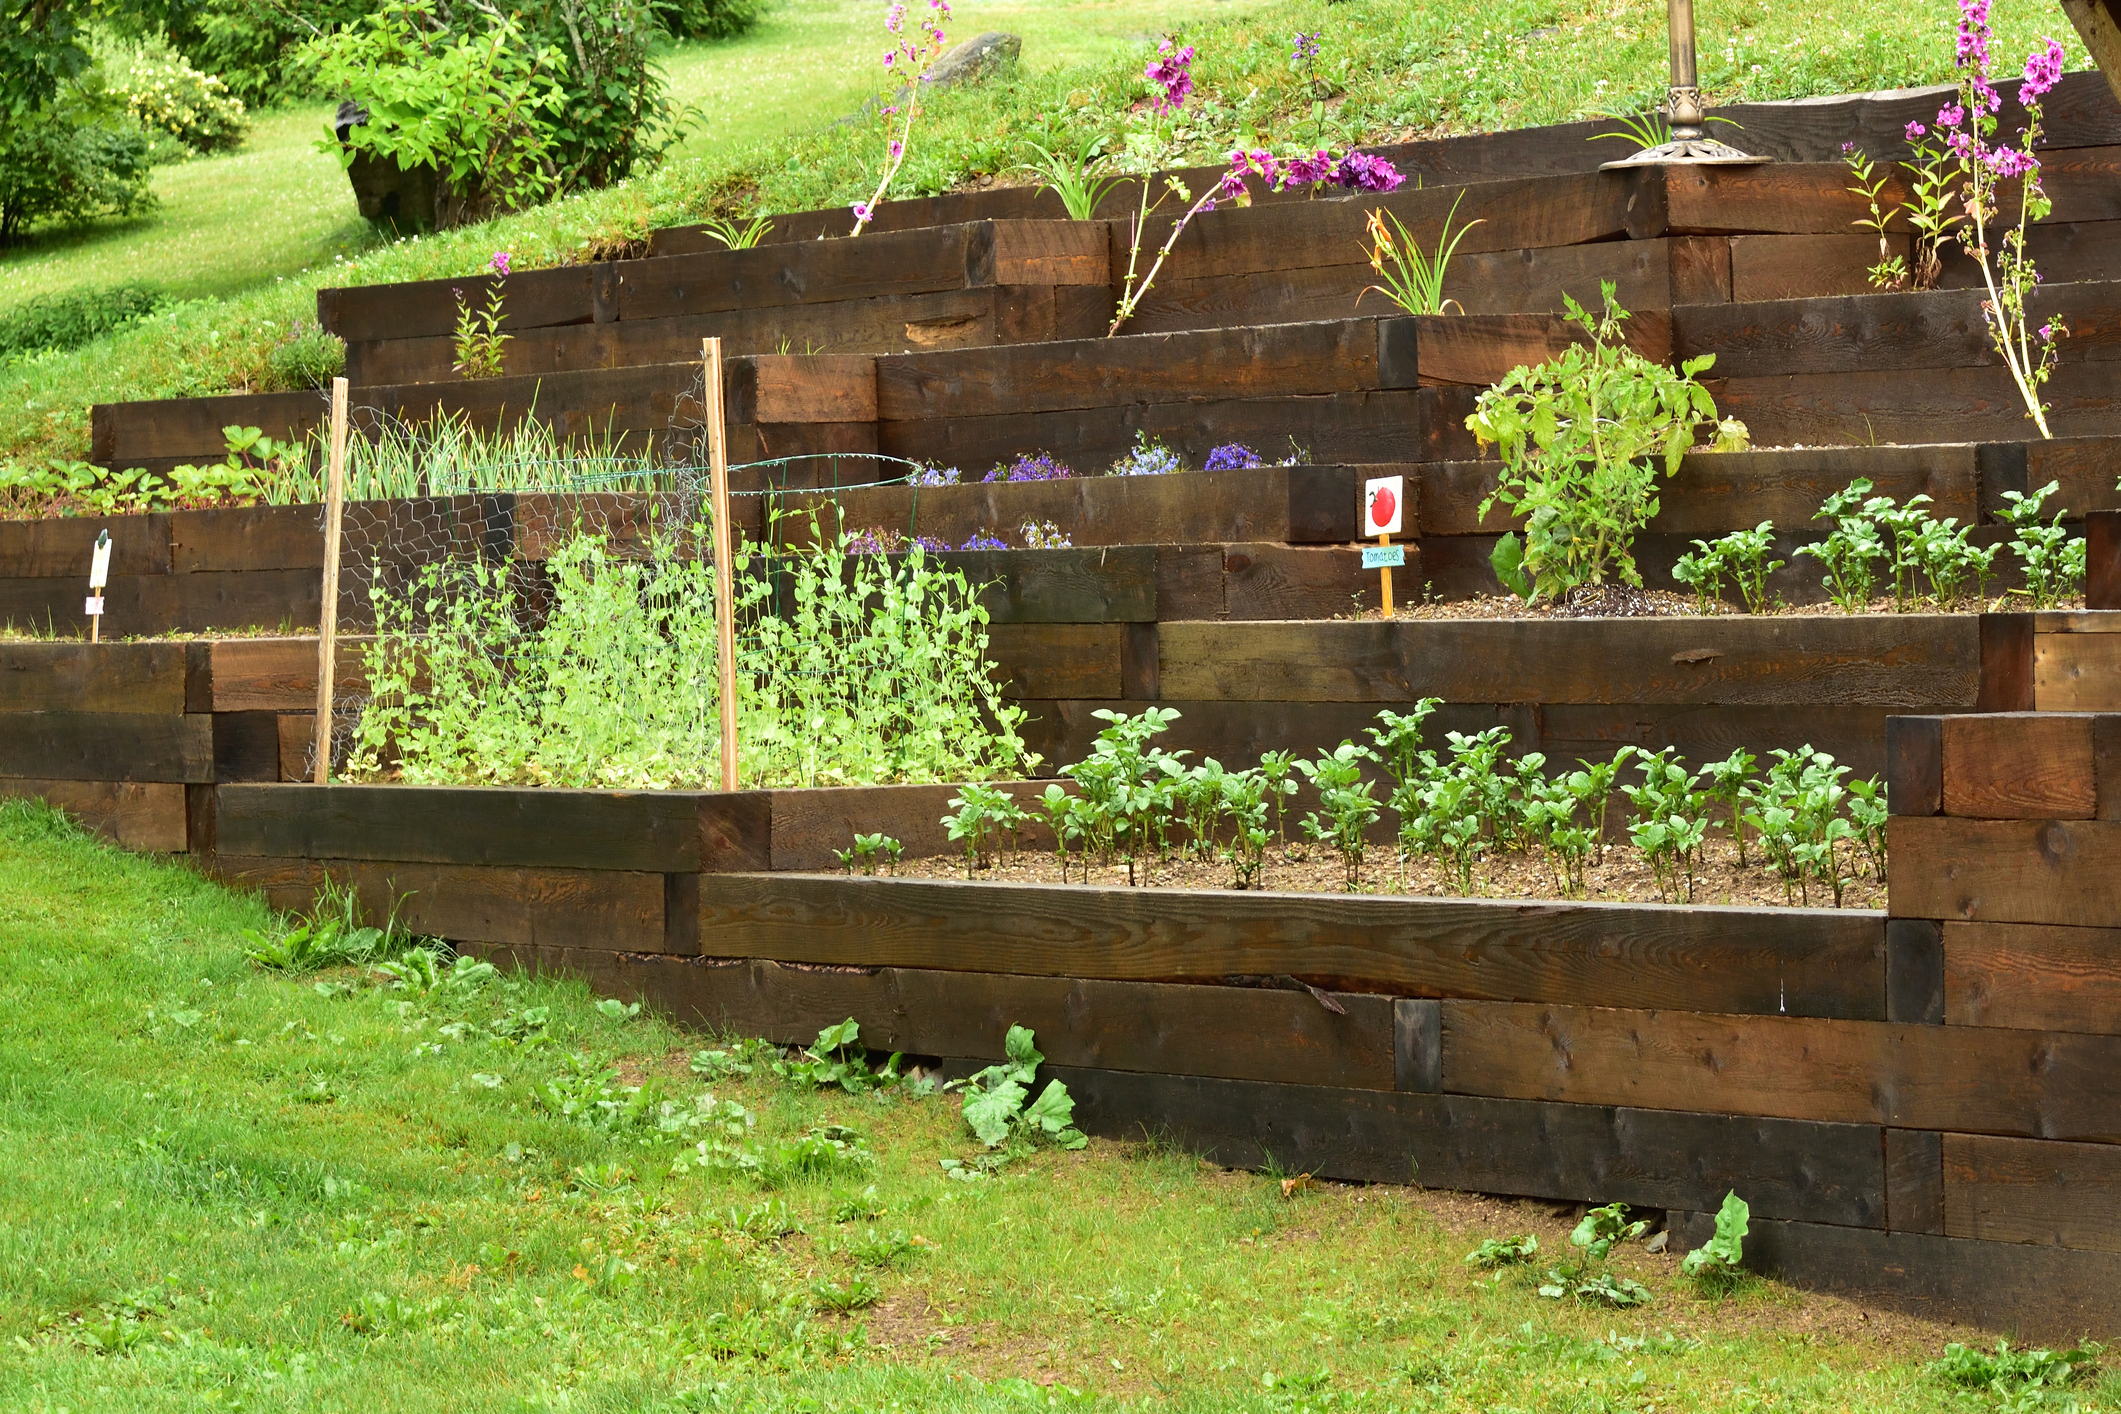 Landscape timber or wood retaining wall engineered with built in planters for garden beds